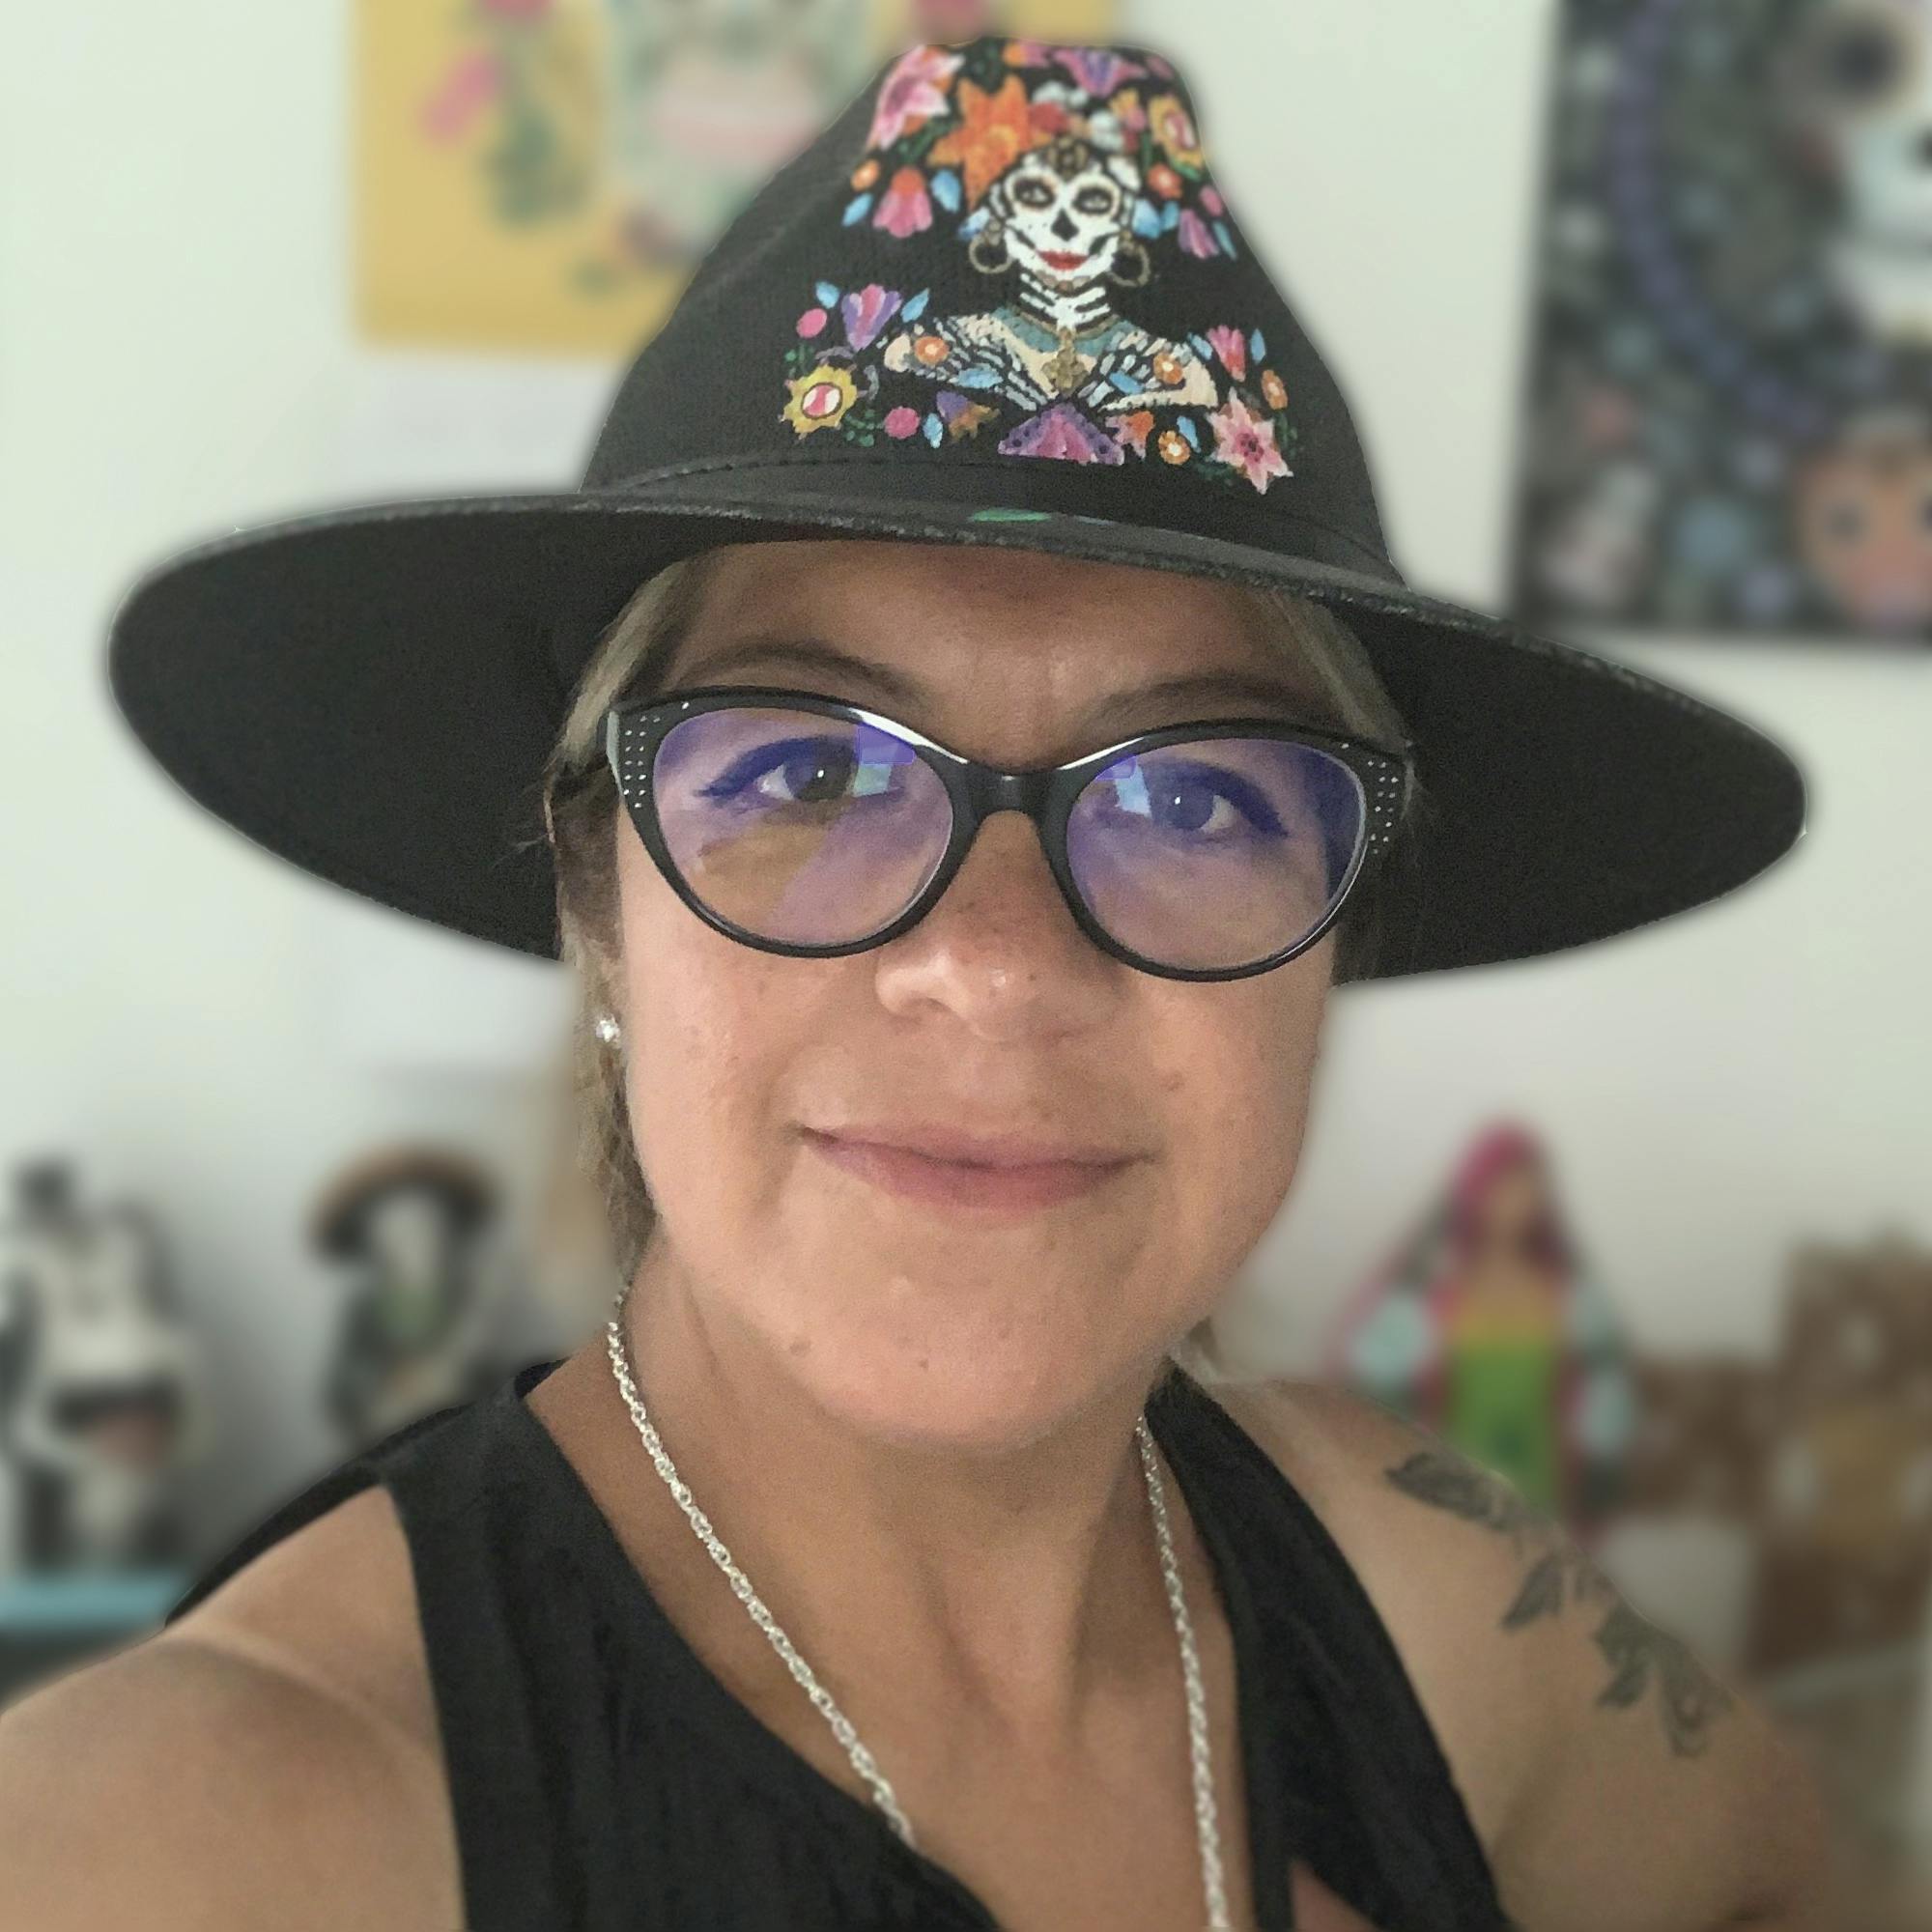 Ana Hernandez, in glasses and colorful hat, smiling